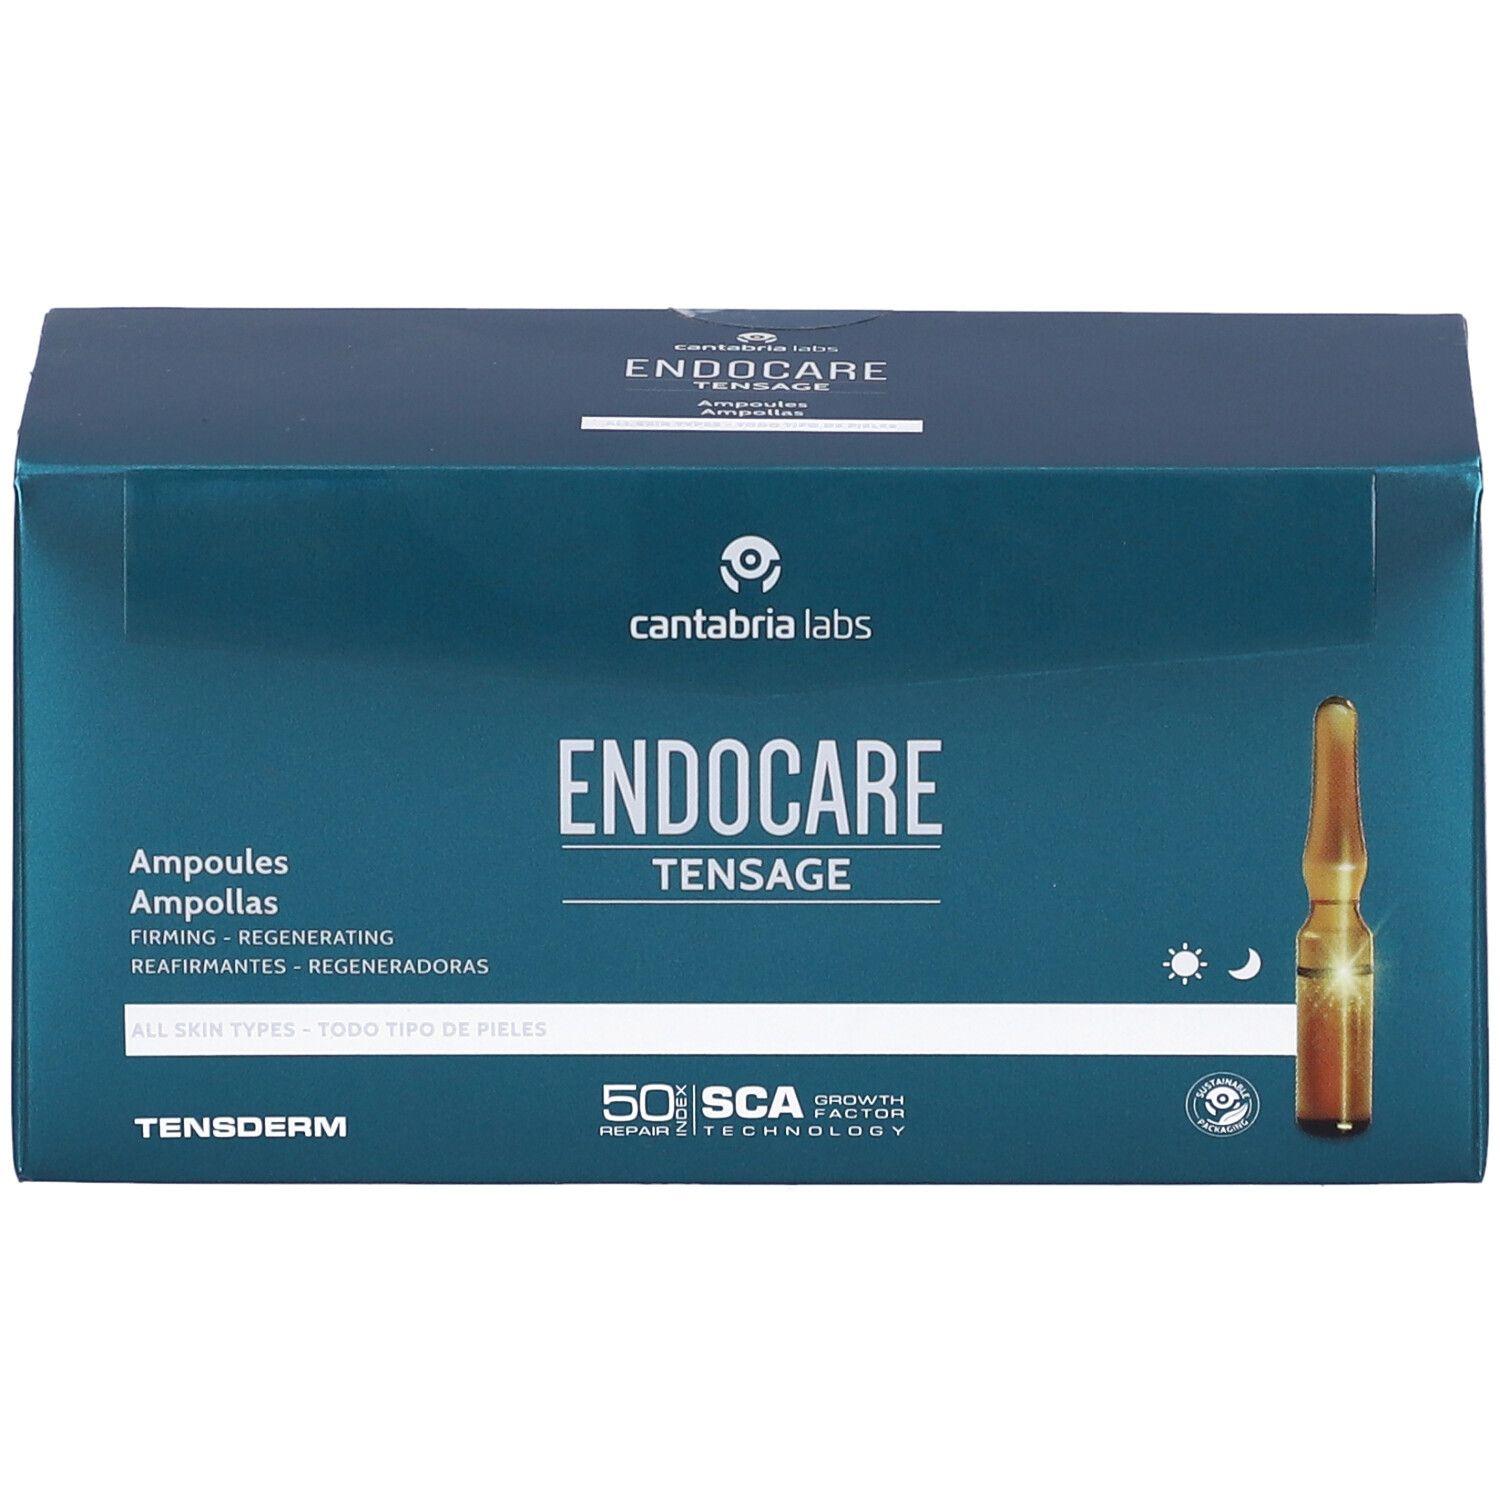 Endocare Tensage Ampolle 10X2 Ml